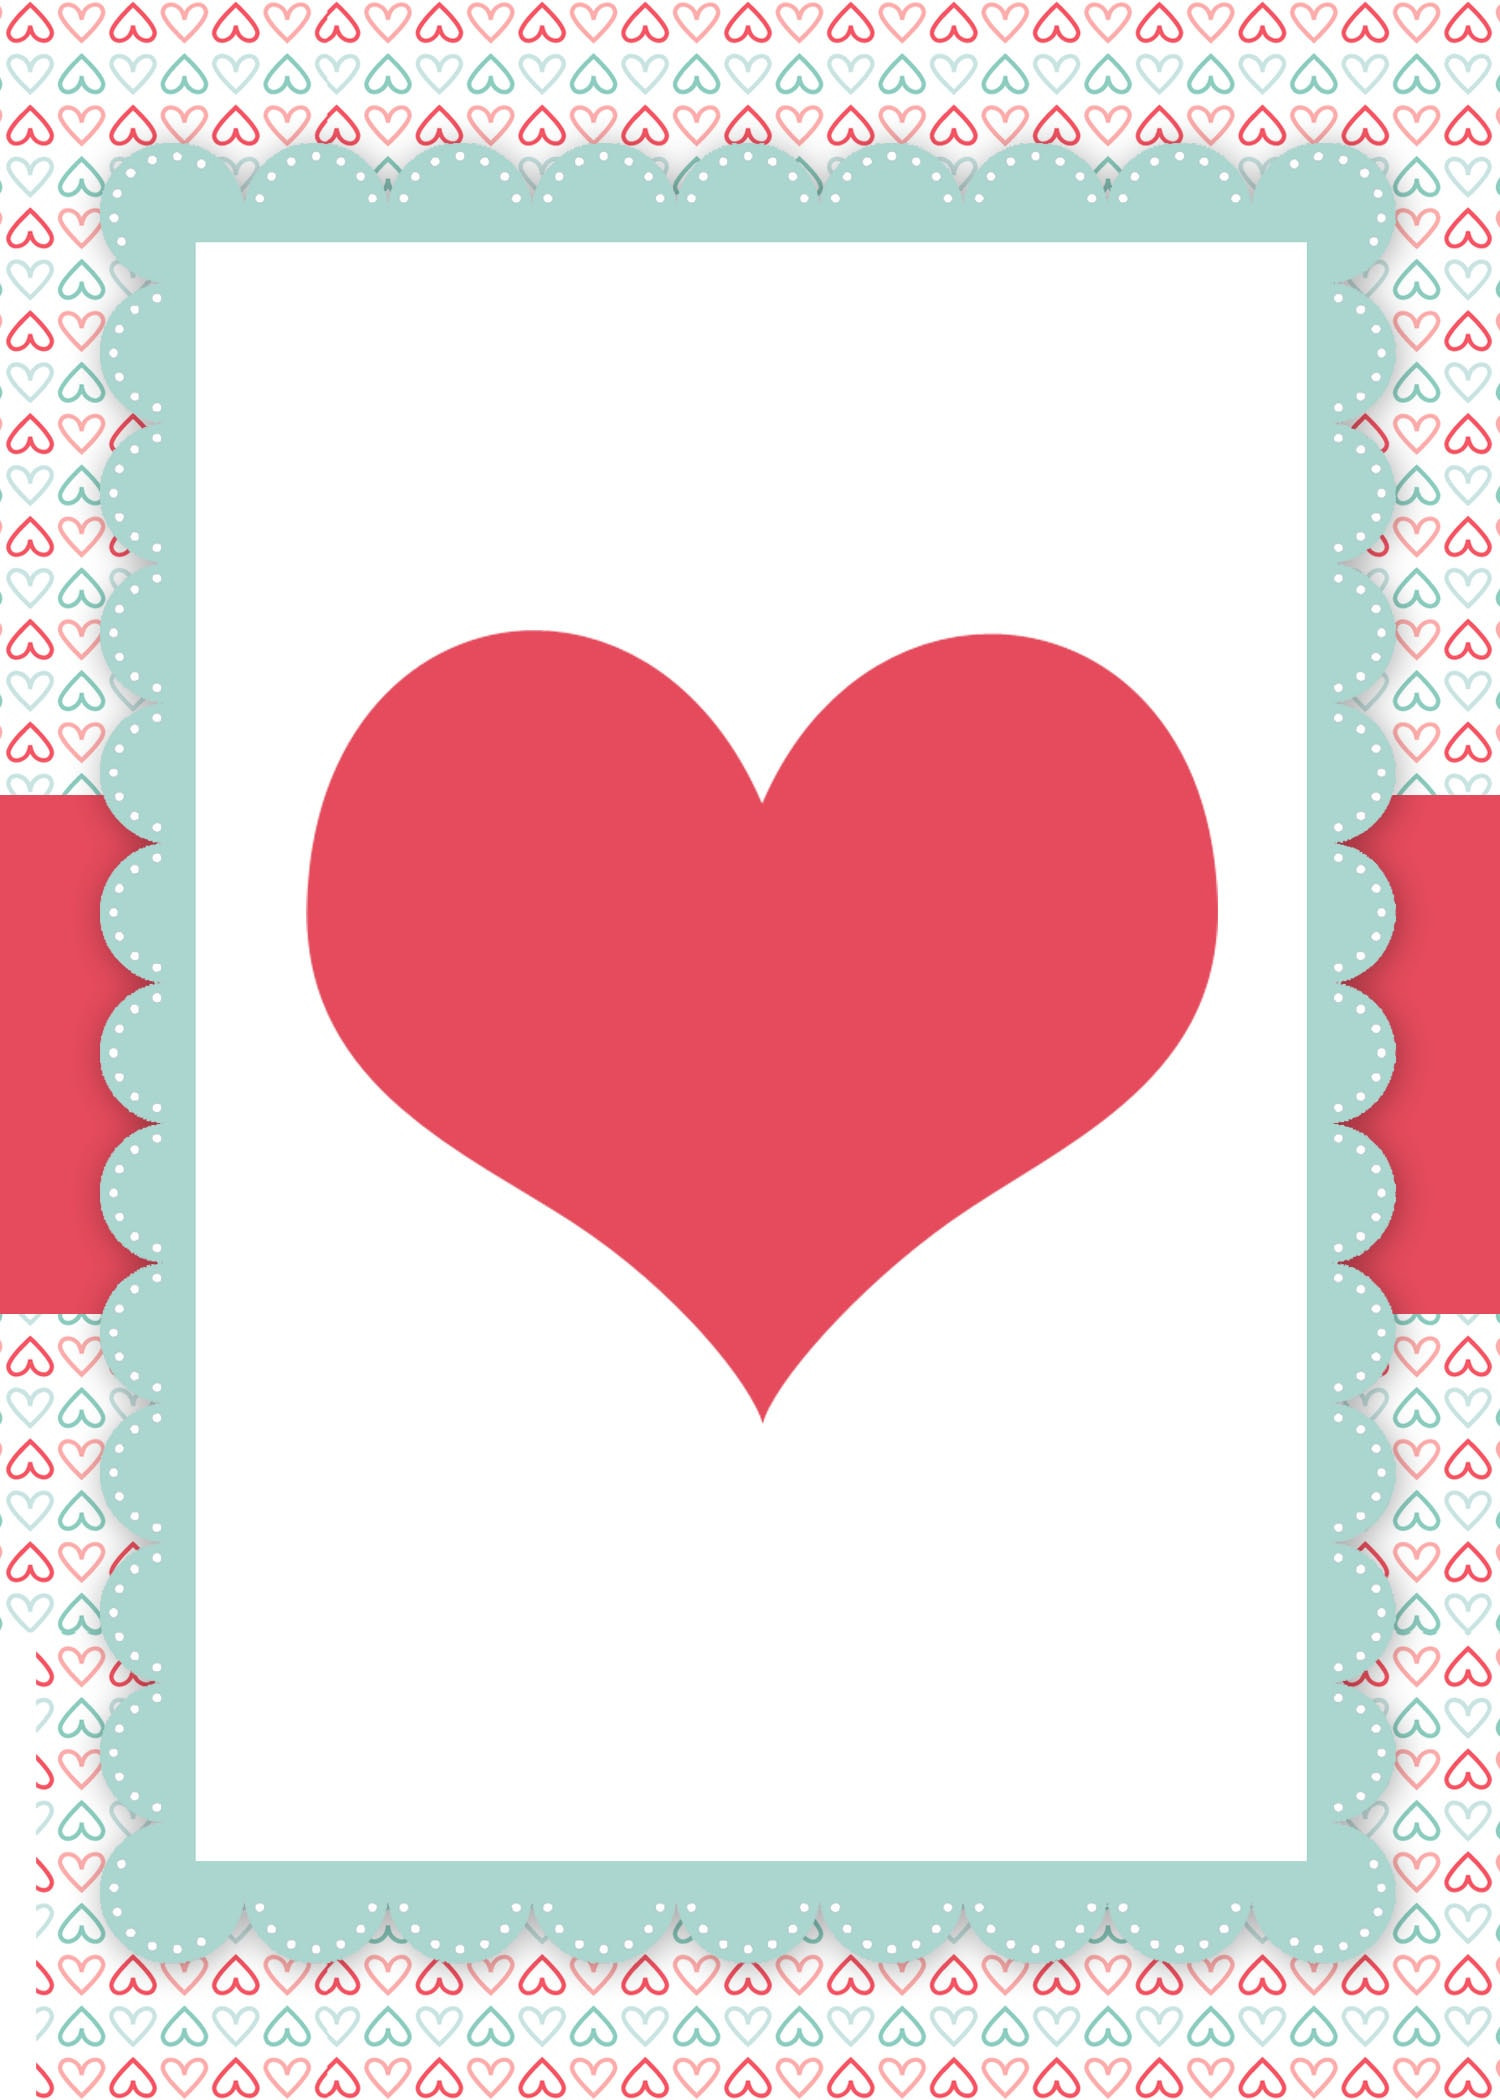 Valentines Day Party Invitations
 Valentine s Day Party FREE Printables How to Nest for Less™